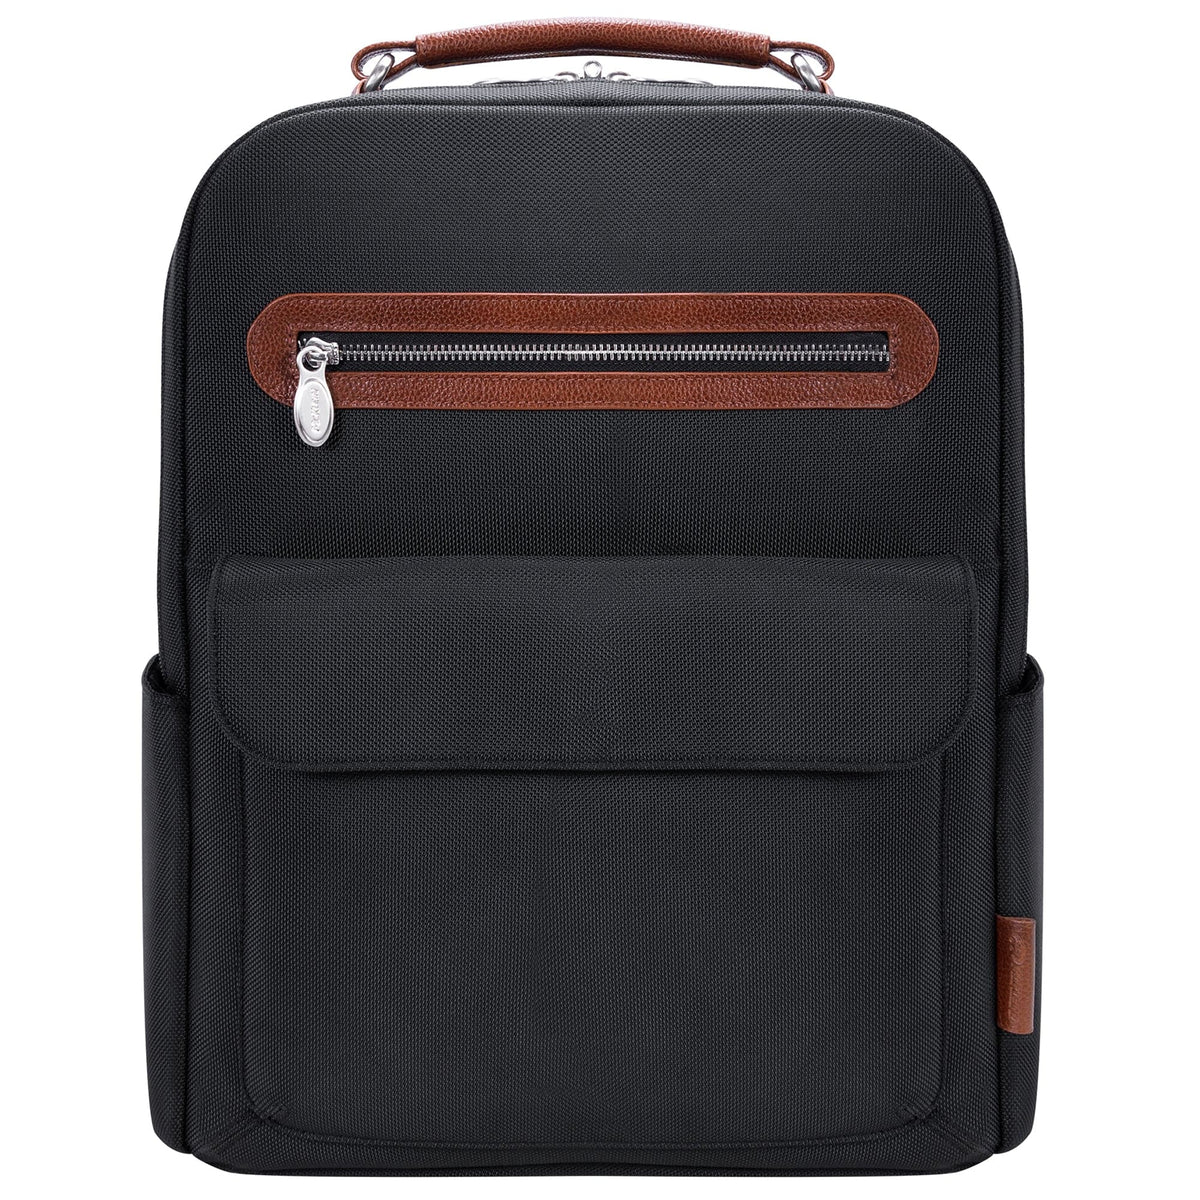 McKlein U Series Logan 17" Two-Tone Dual-Compartment Laptop and Tablet Nylon Backpack - Black